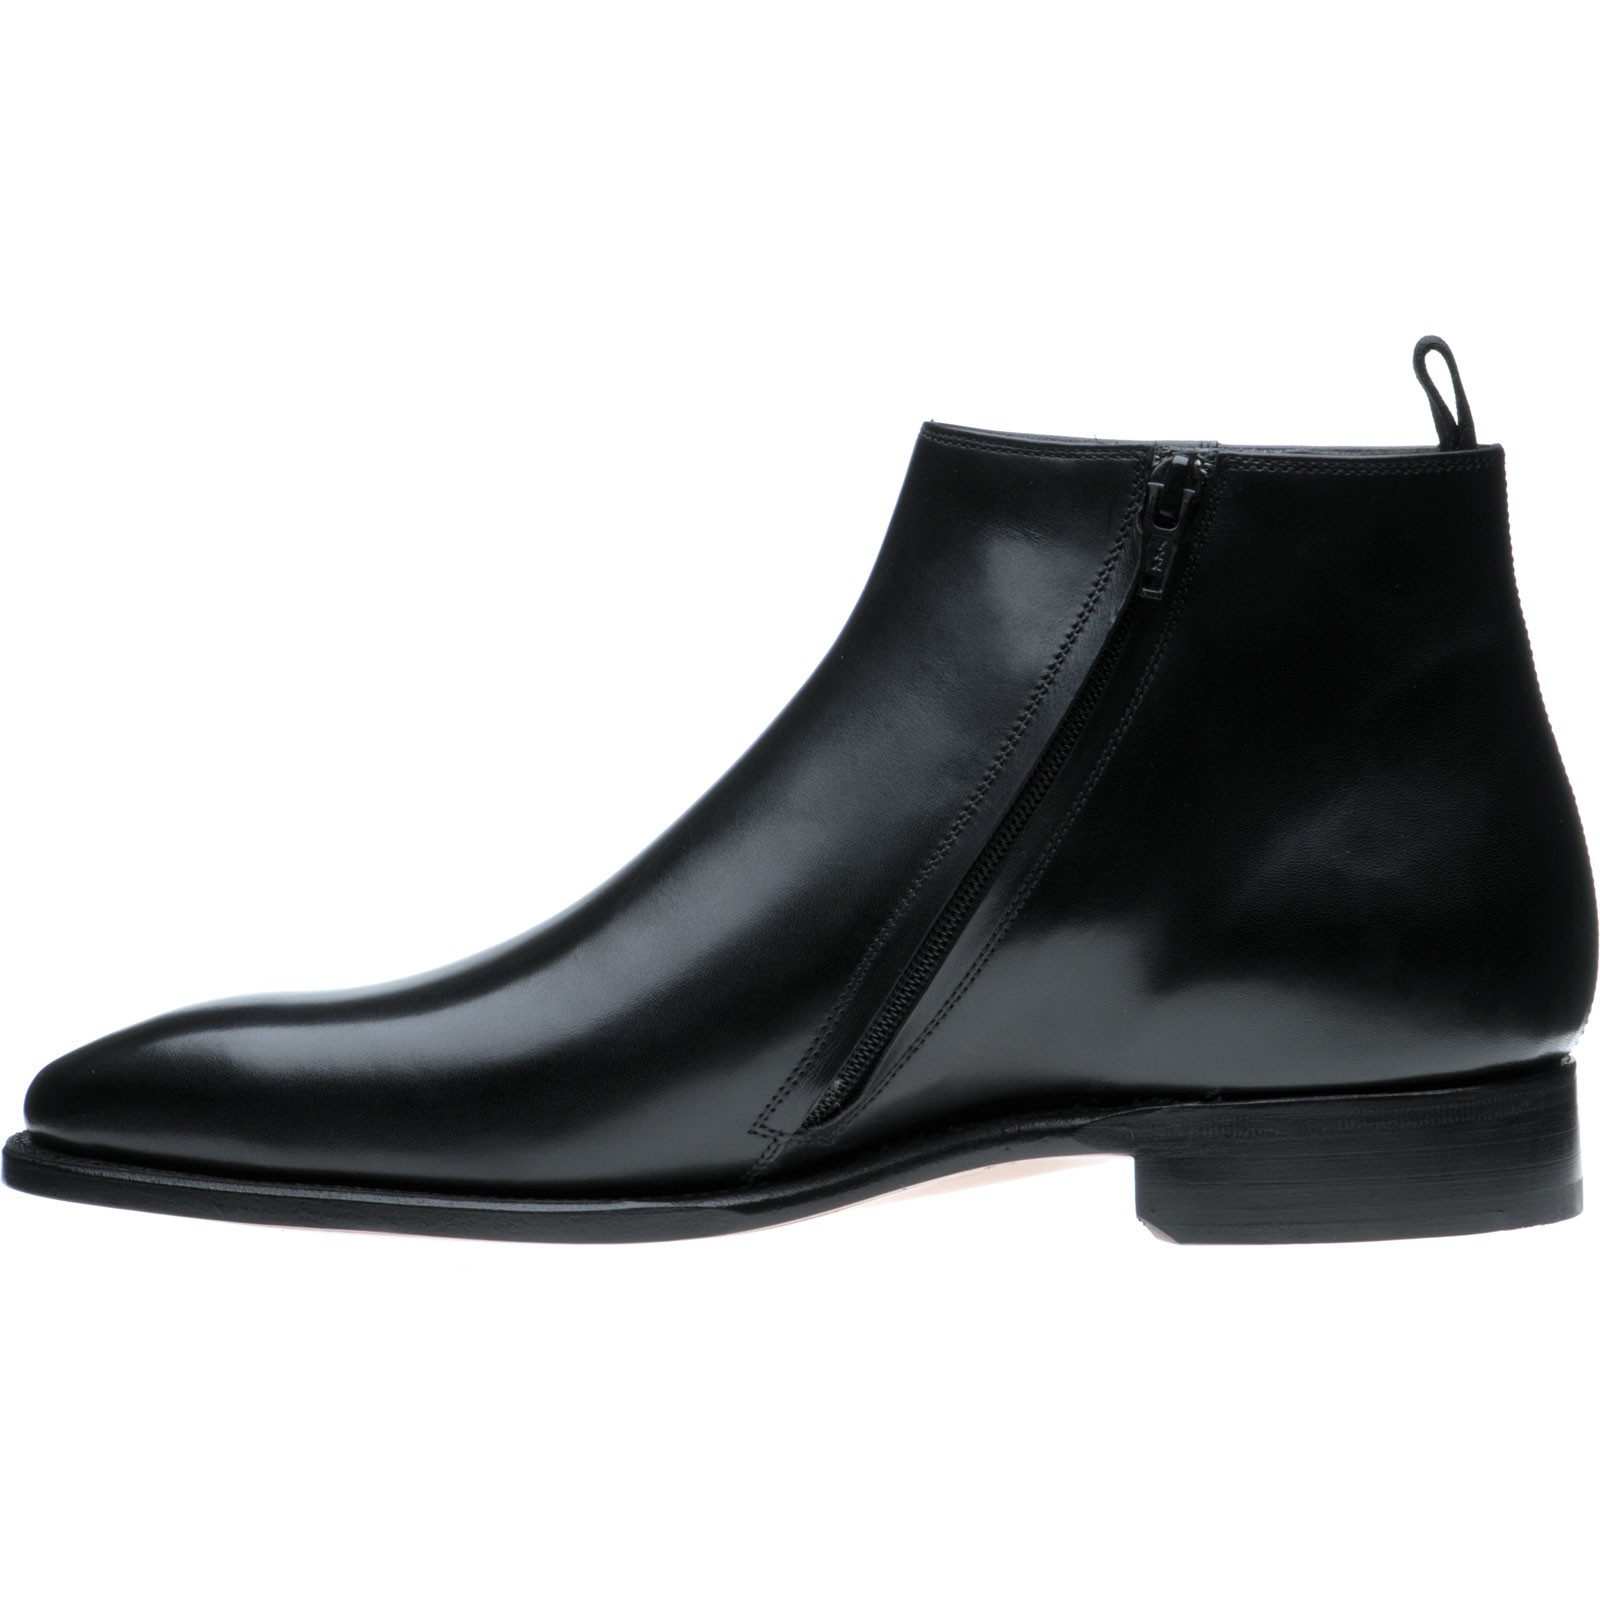 Herring shoes | Herring Classic | Jude Chelsea boots in Black Calf at ...